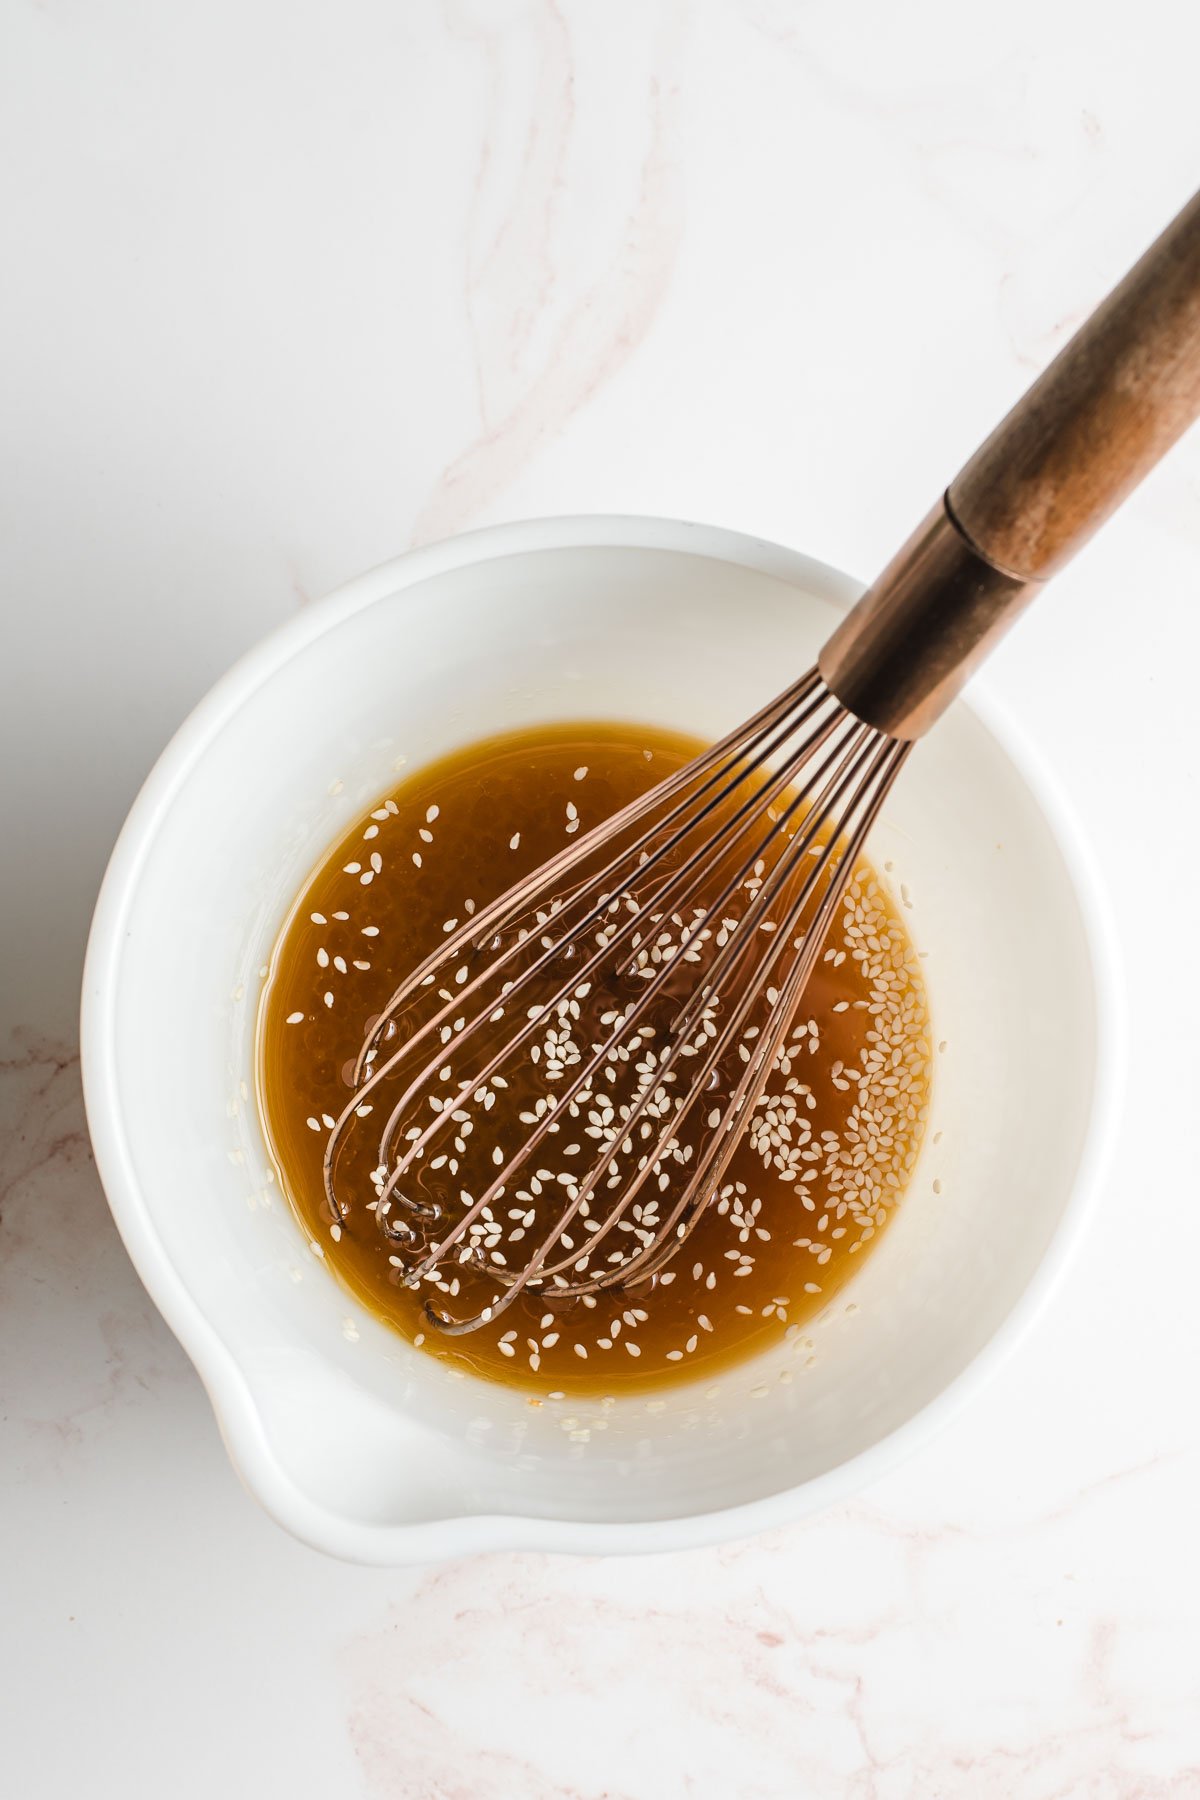 Asian sesame dressing shown in a white bowl with a whisk.